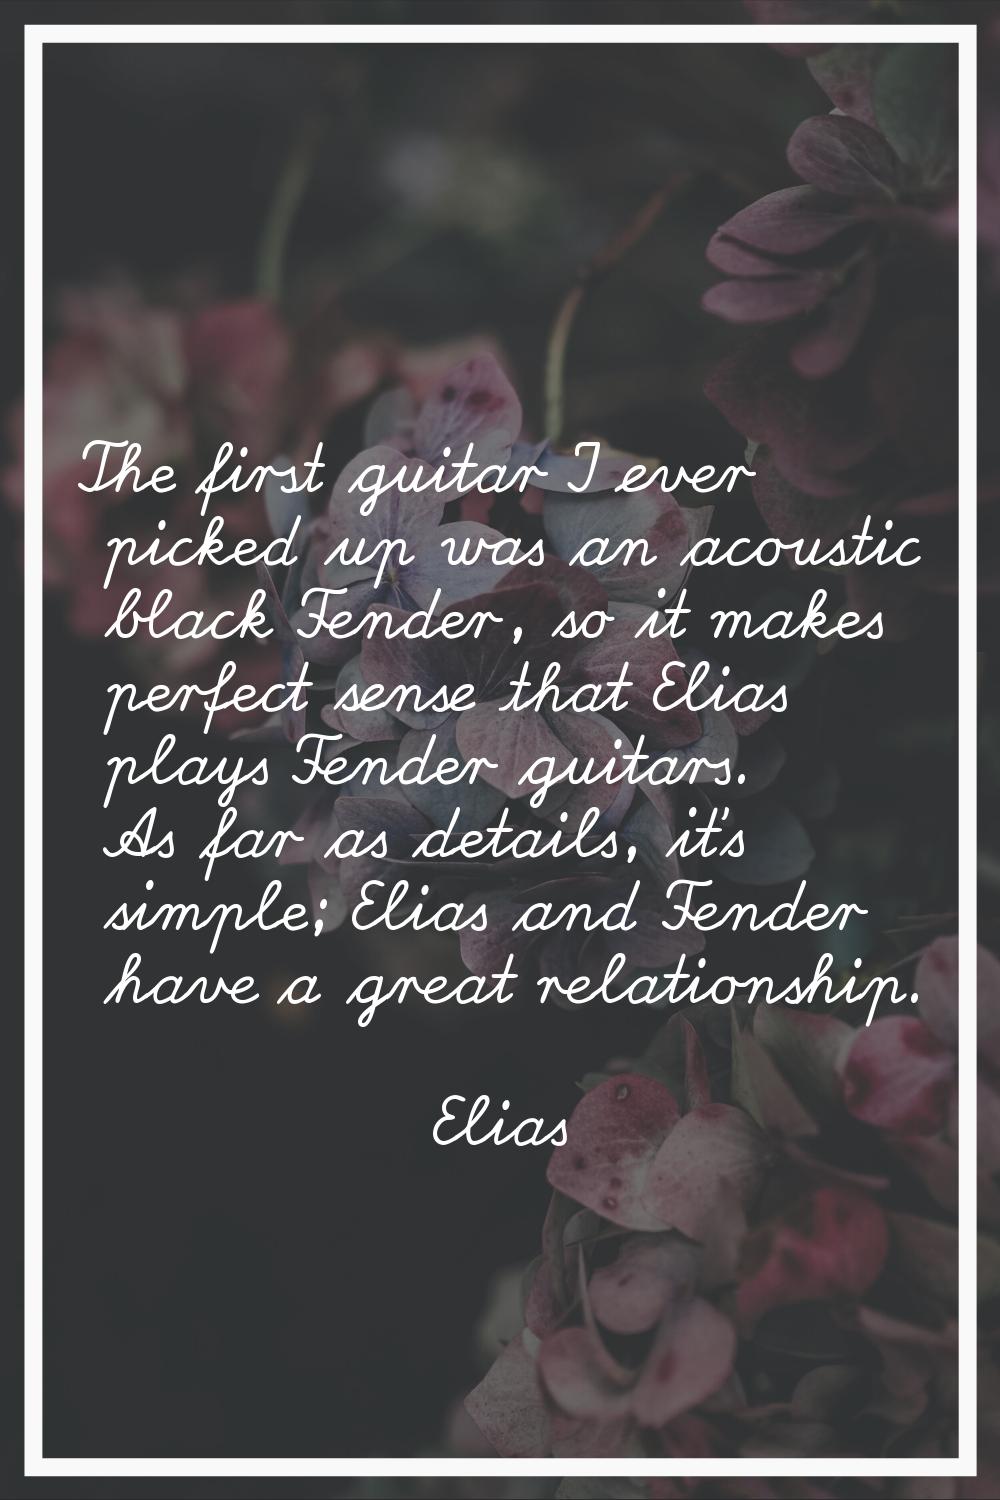 The first guitar I ever picked up was an acoustic black Fender, so it makes perfect sense that Elia